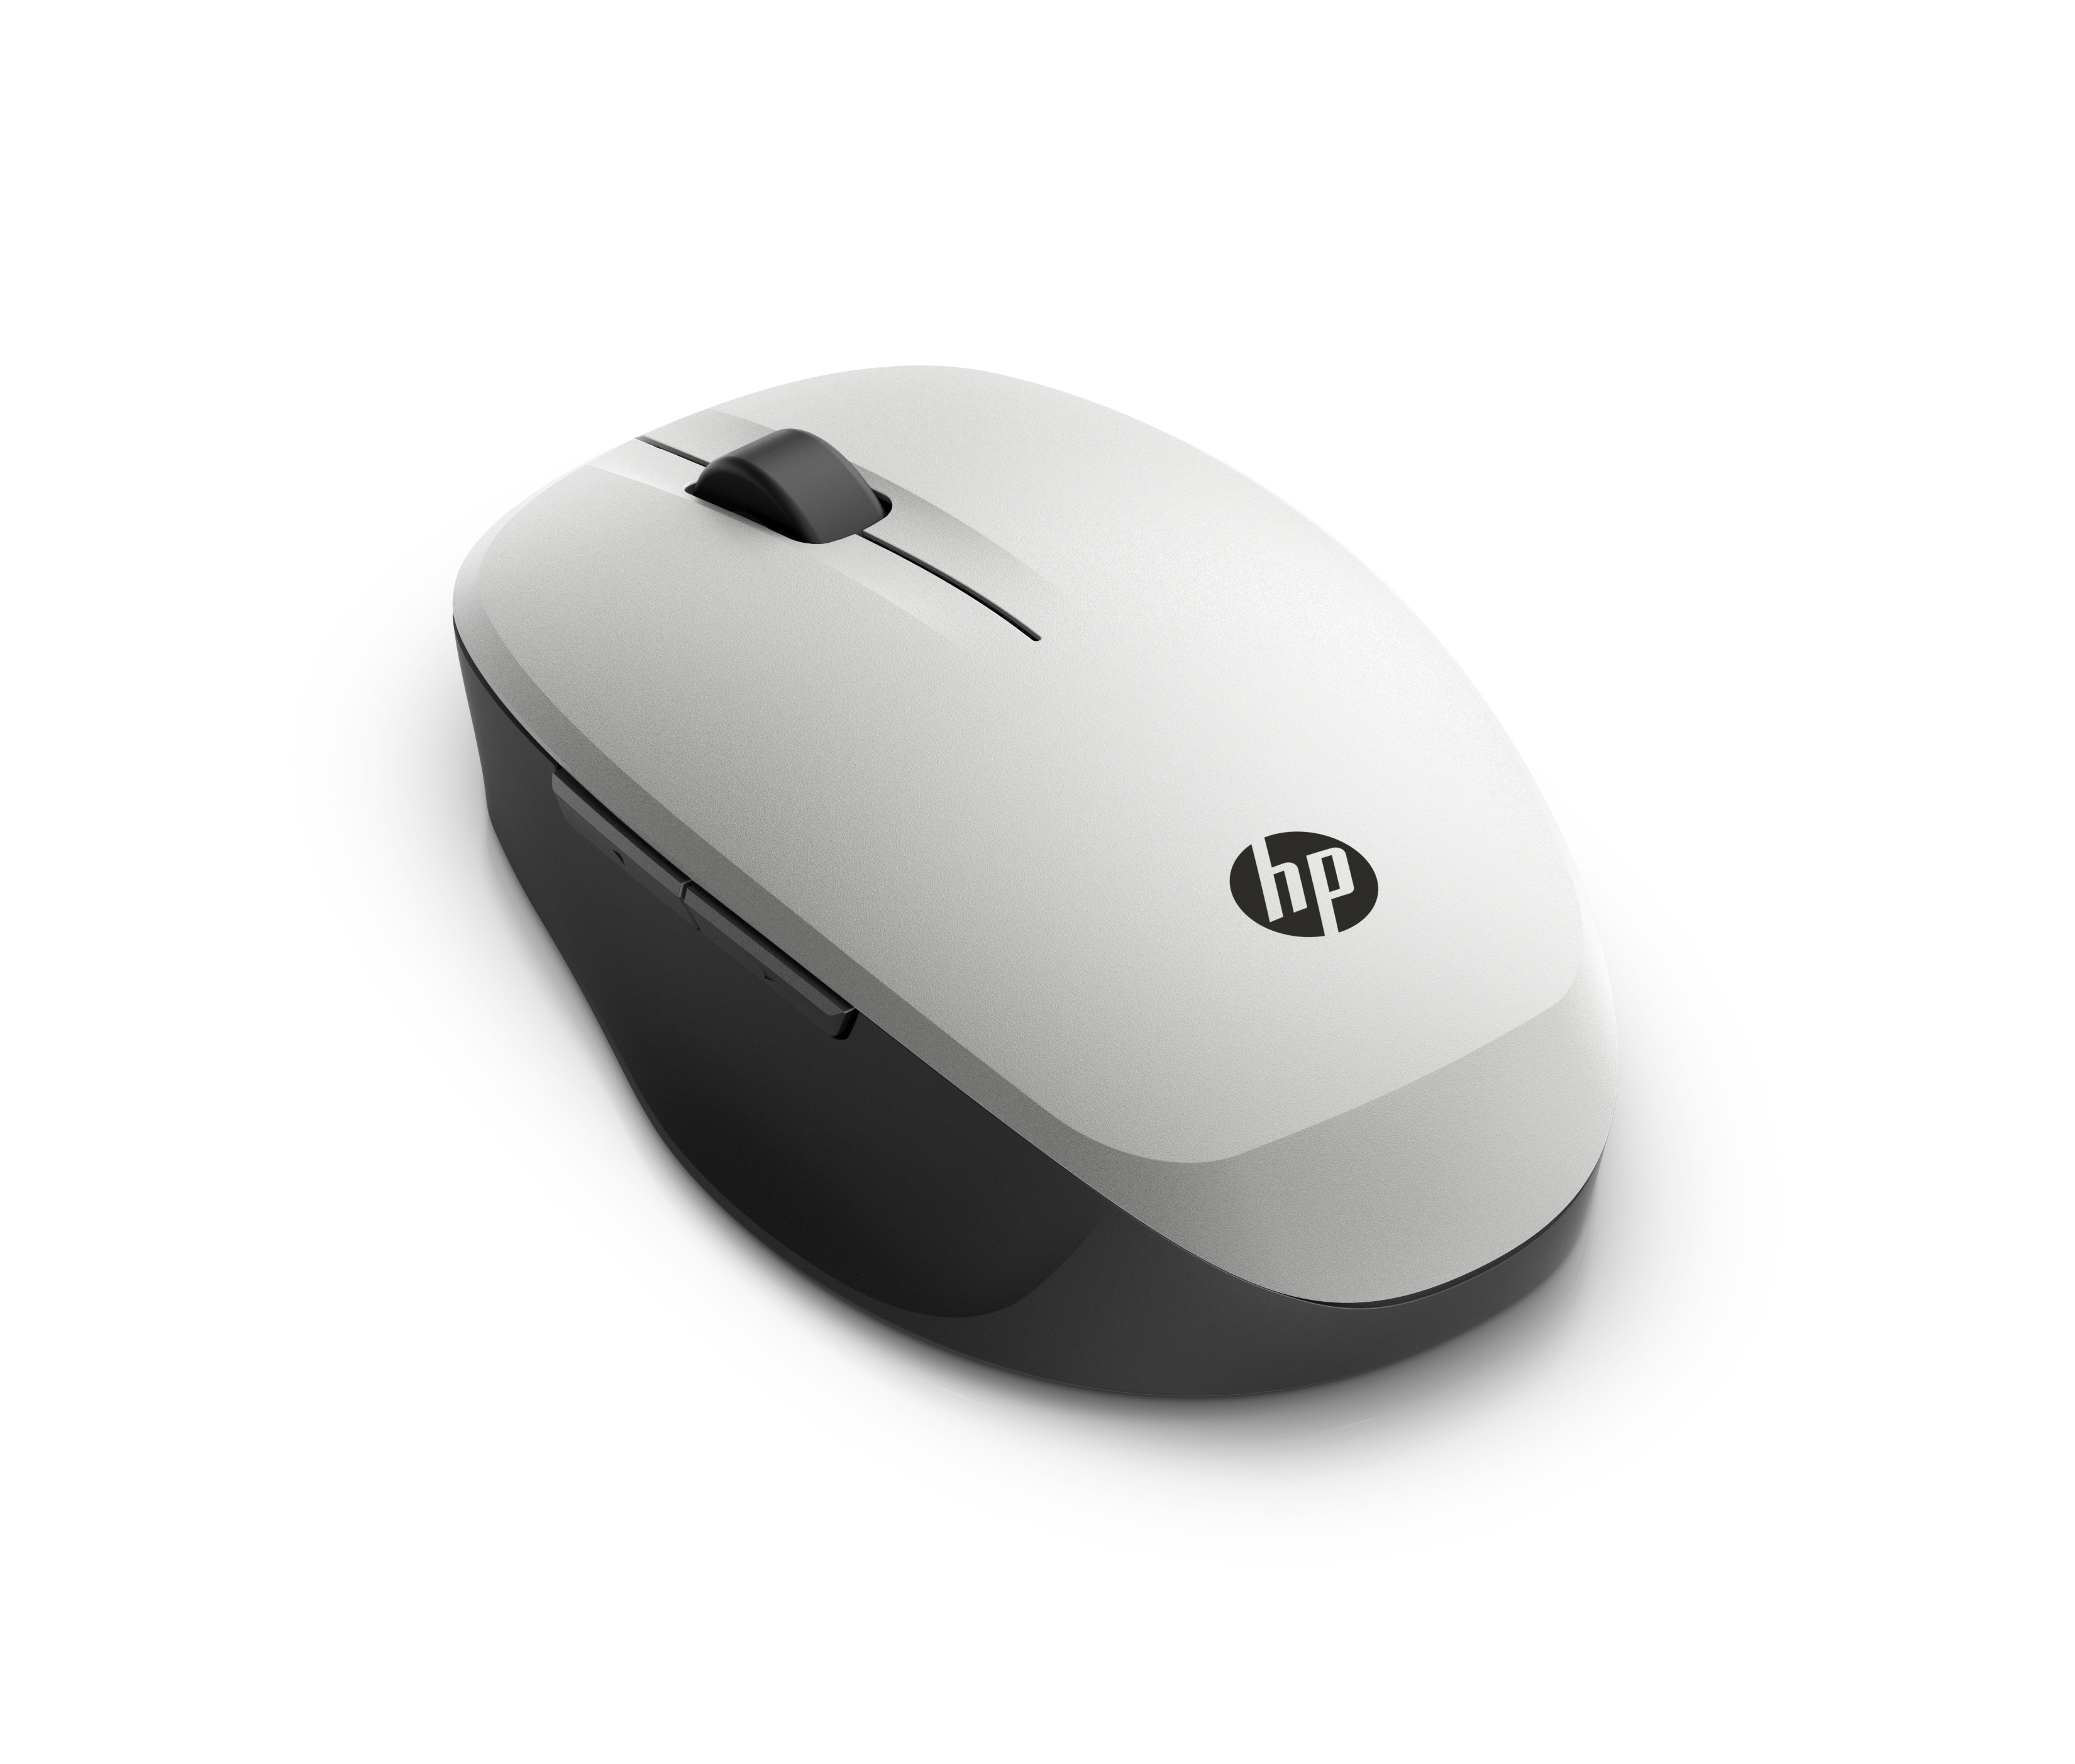 HP Z5000 Pike Silver BT Mouse